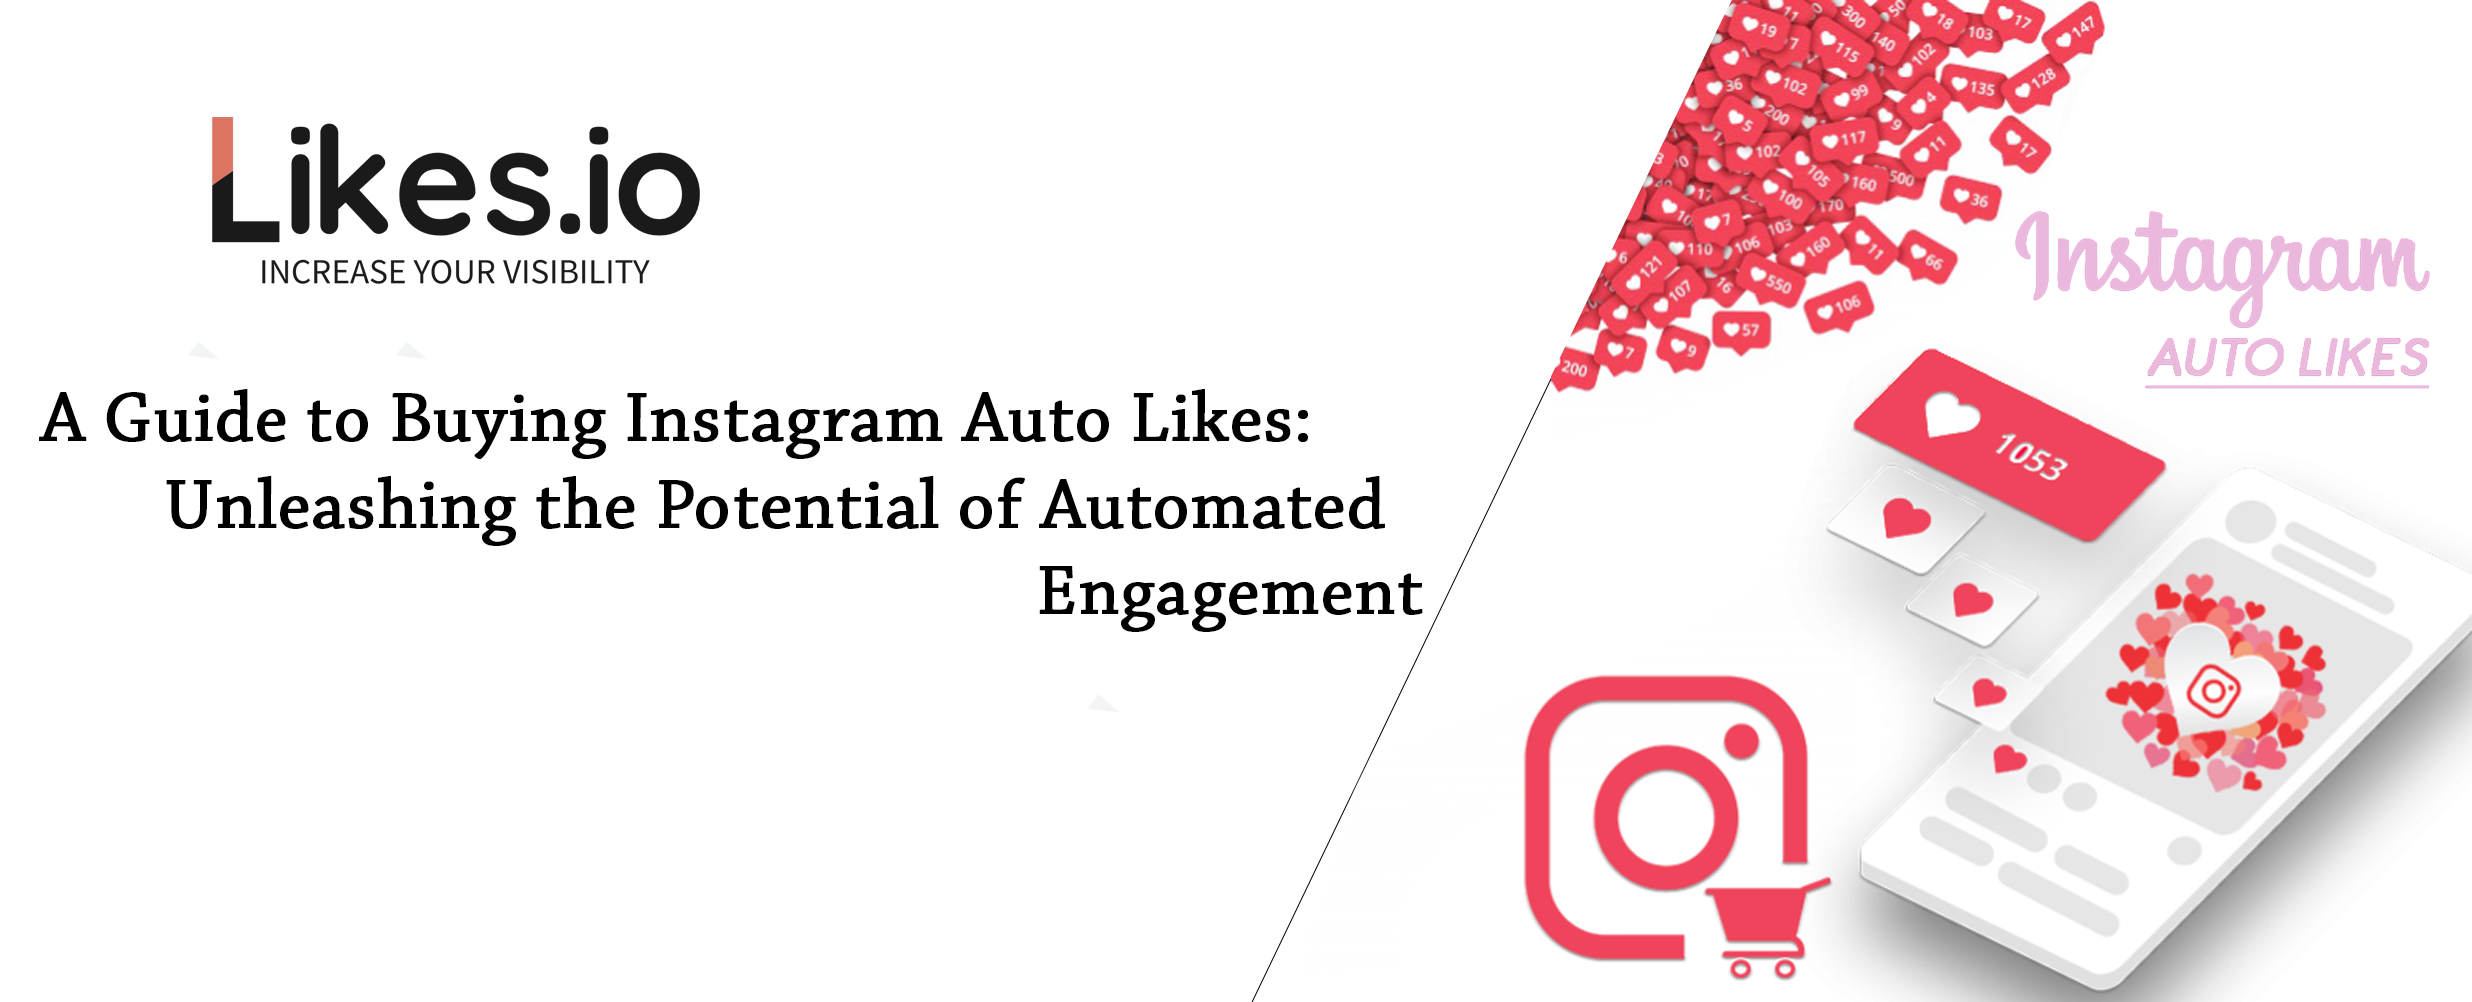 A Guide to Buying Instagram Auto Likes: Unleashing the Potential of Automated Engagement